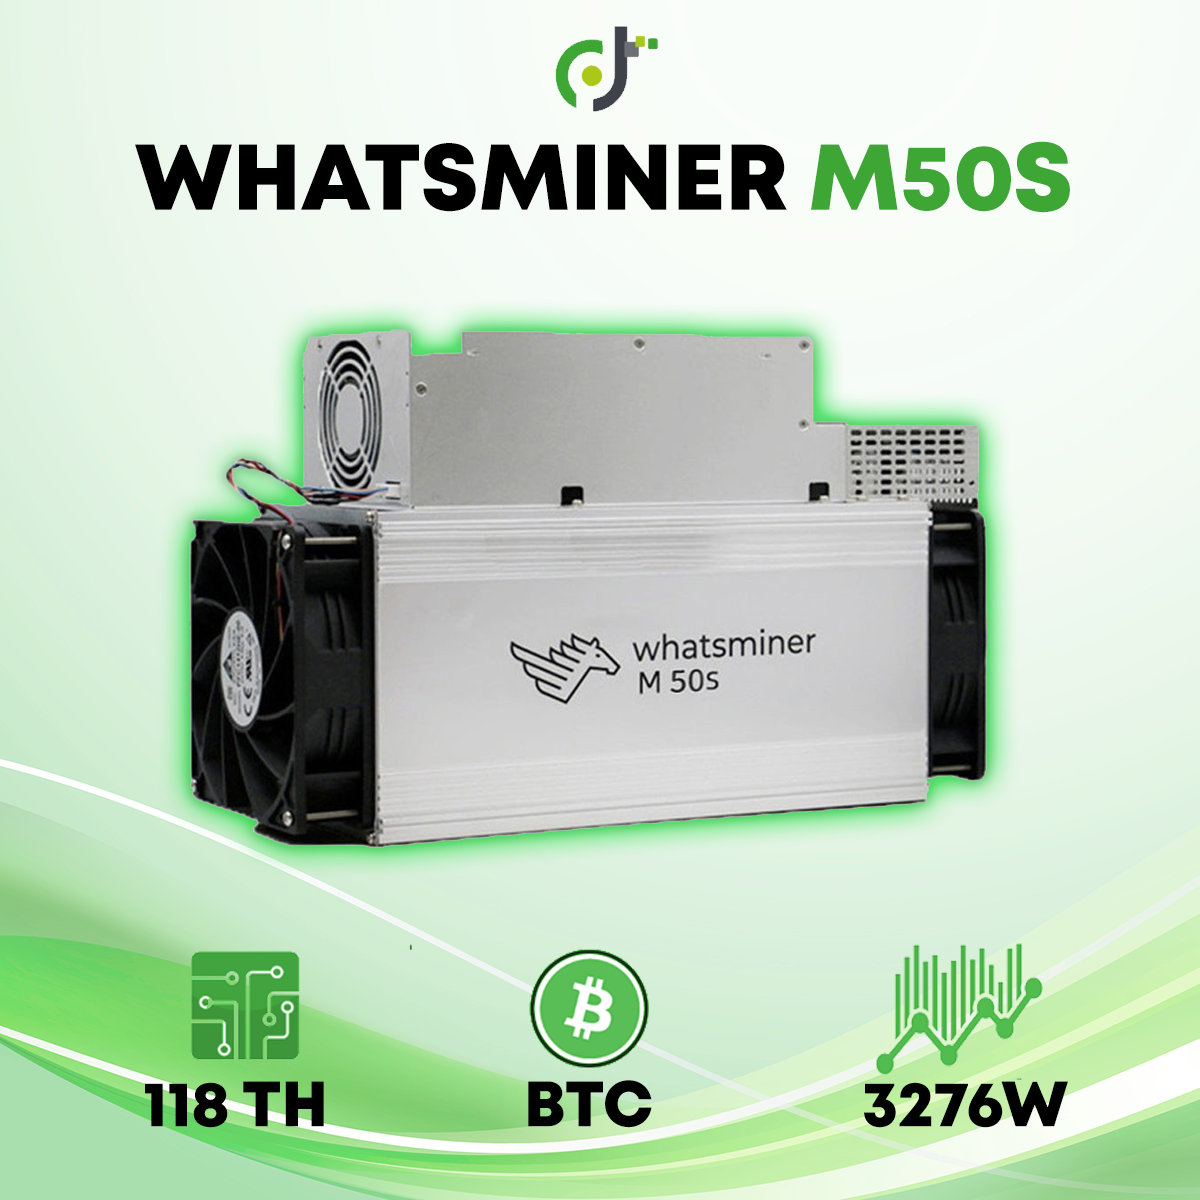 MicroBT Whatsminer M50+ (118Th) Bitcoin Crypto ASIC Miner